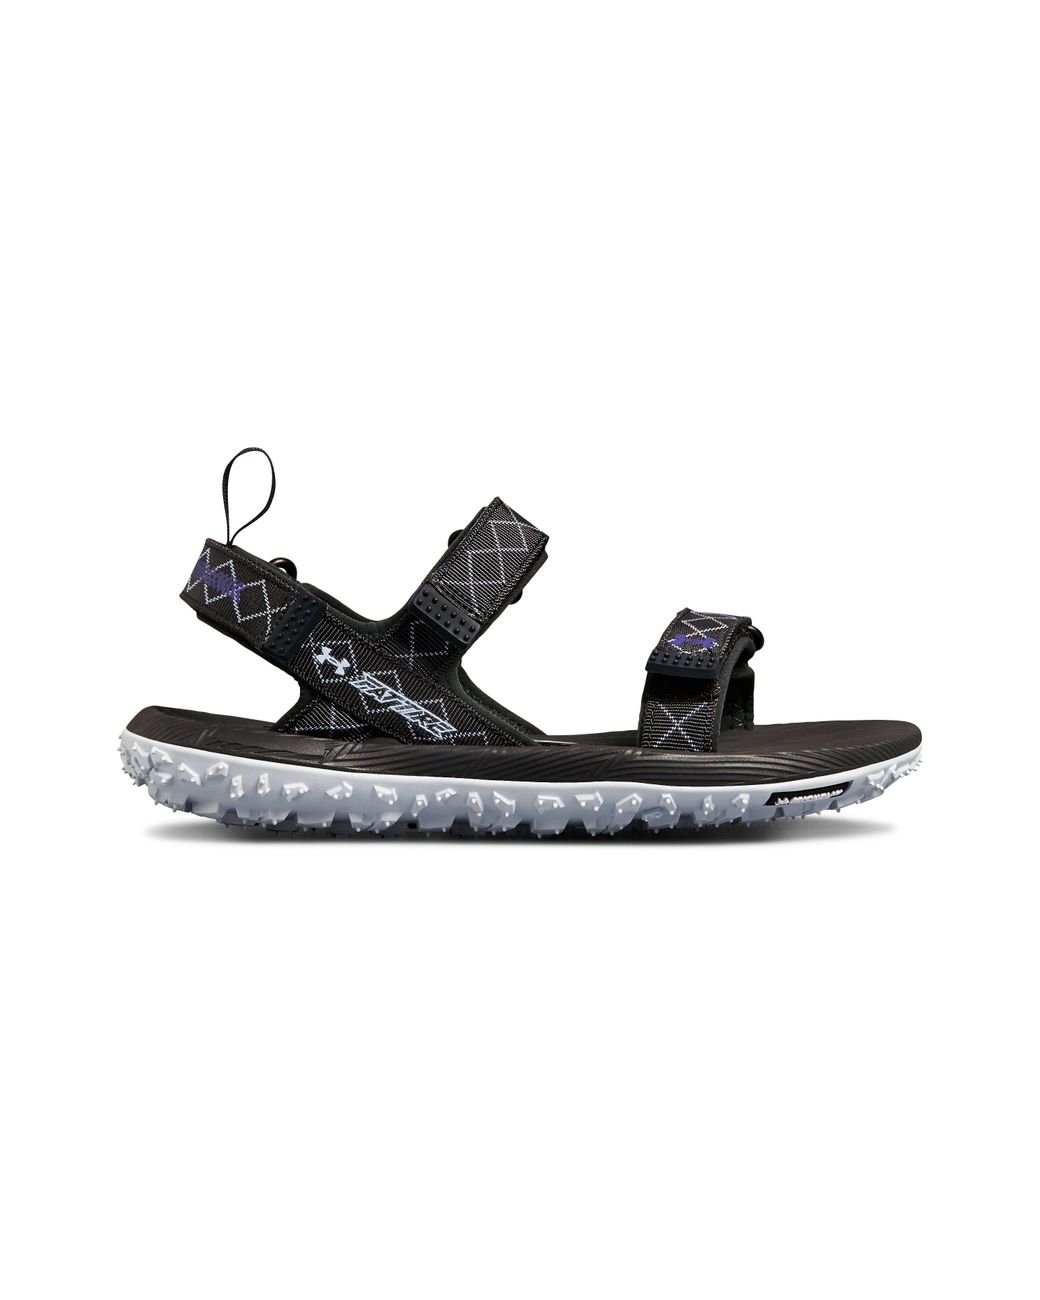 Under Armour Synthetic Women's Ua Fat Tire Sandals | Lyst